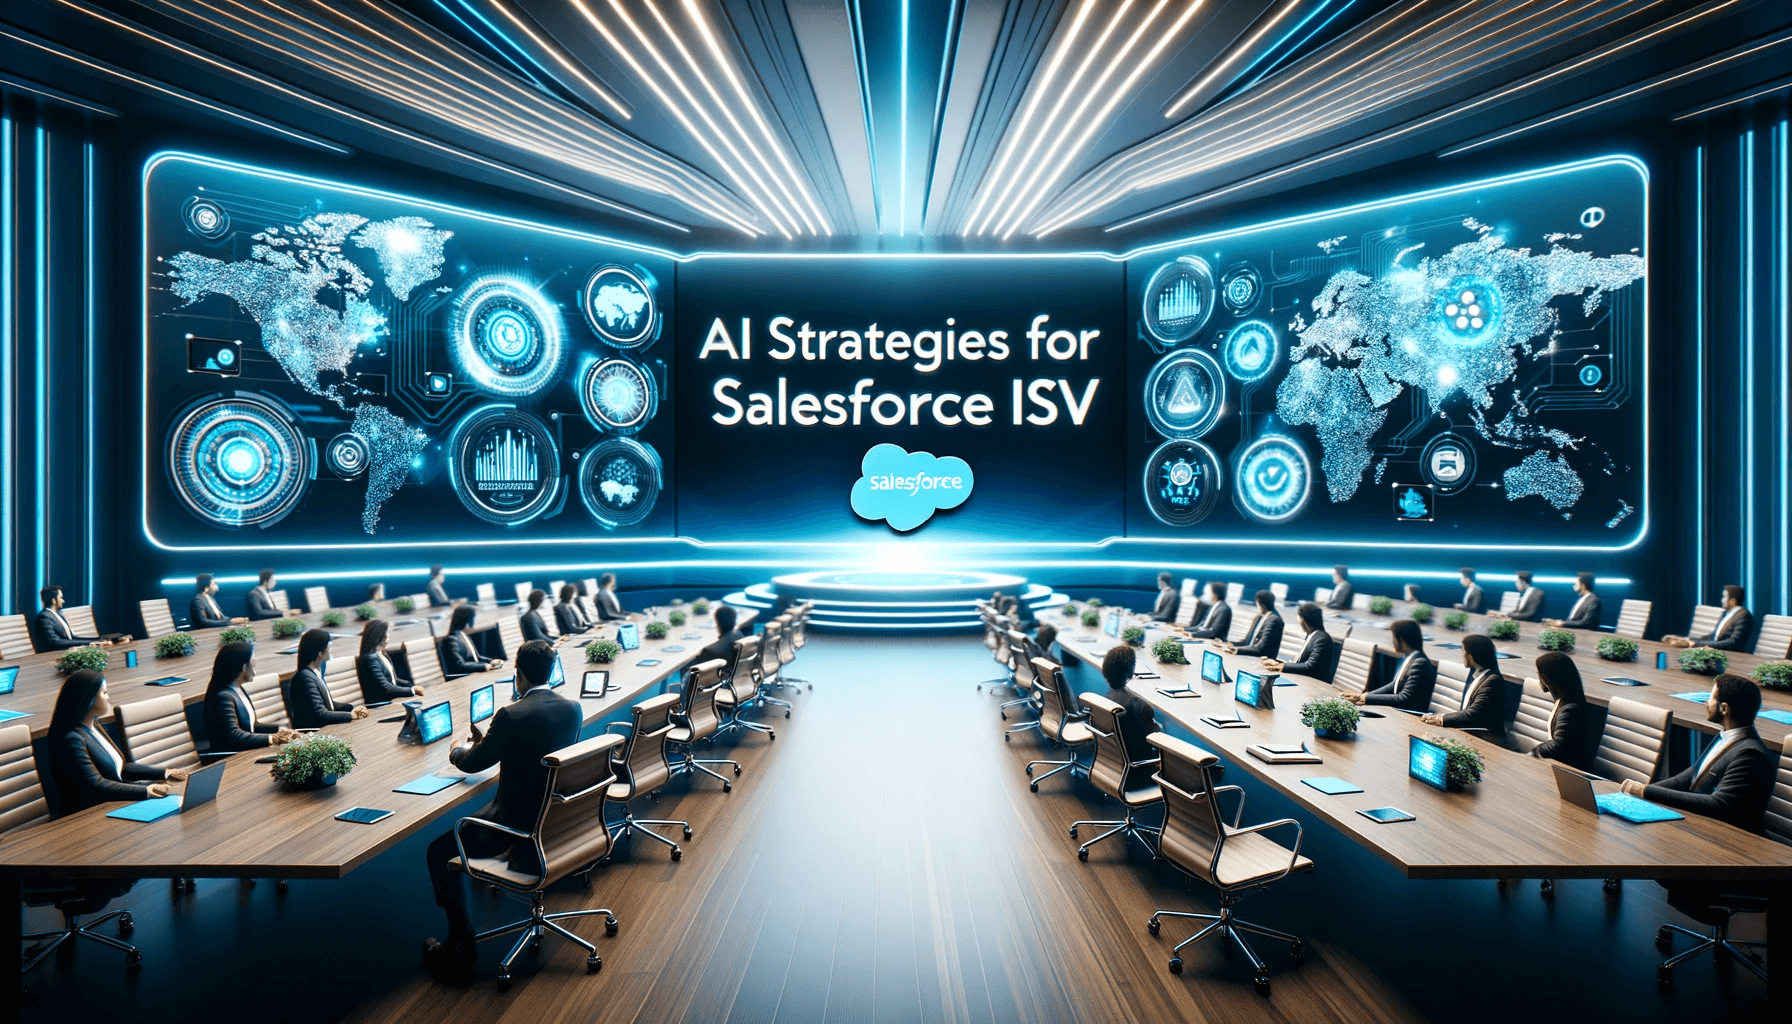 Photo of a dynamic conference room with Salesforce branding on digital screens and visual aids showcasing AI strategies, with the title 'AI Strategies for Salesforce ISVs' prominently displayed.